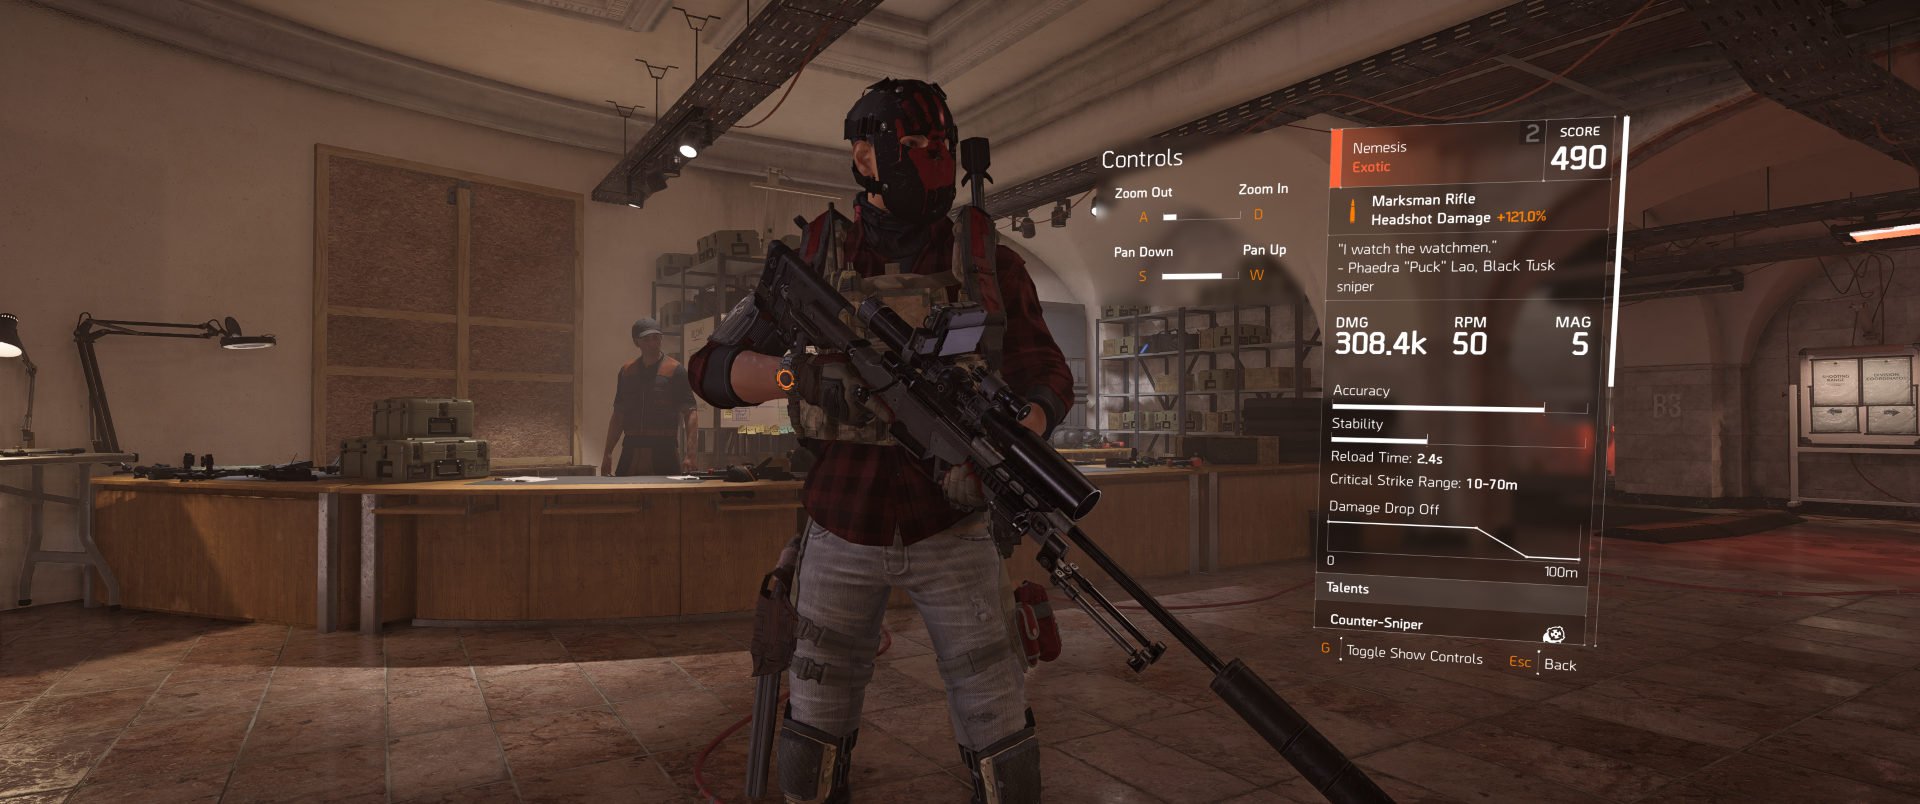 Tom Clancy's The Division 2 Screenshot 2019.04.18 - 21.45.39.48 (Large).png